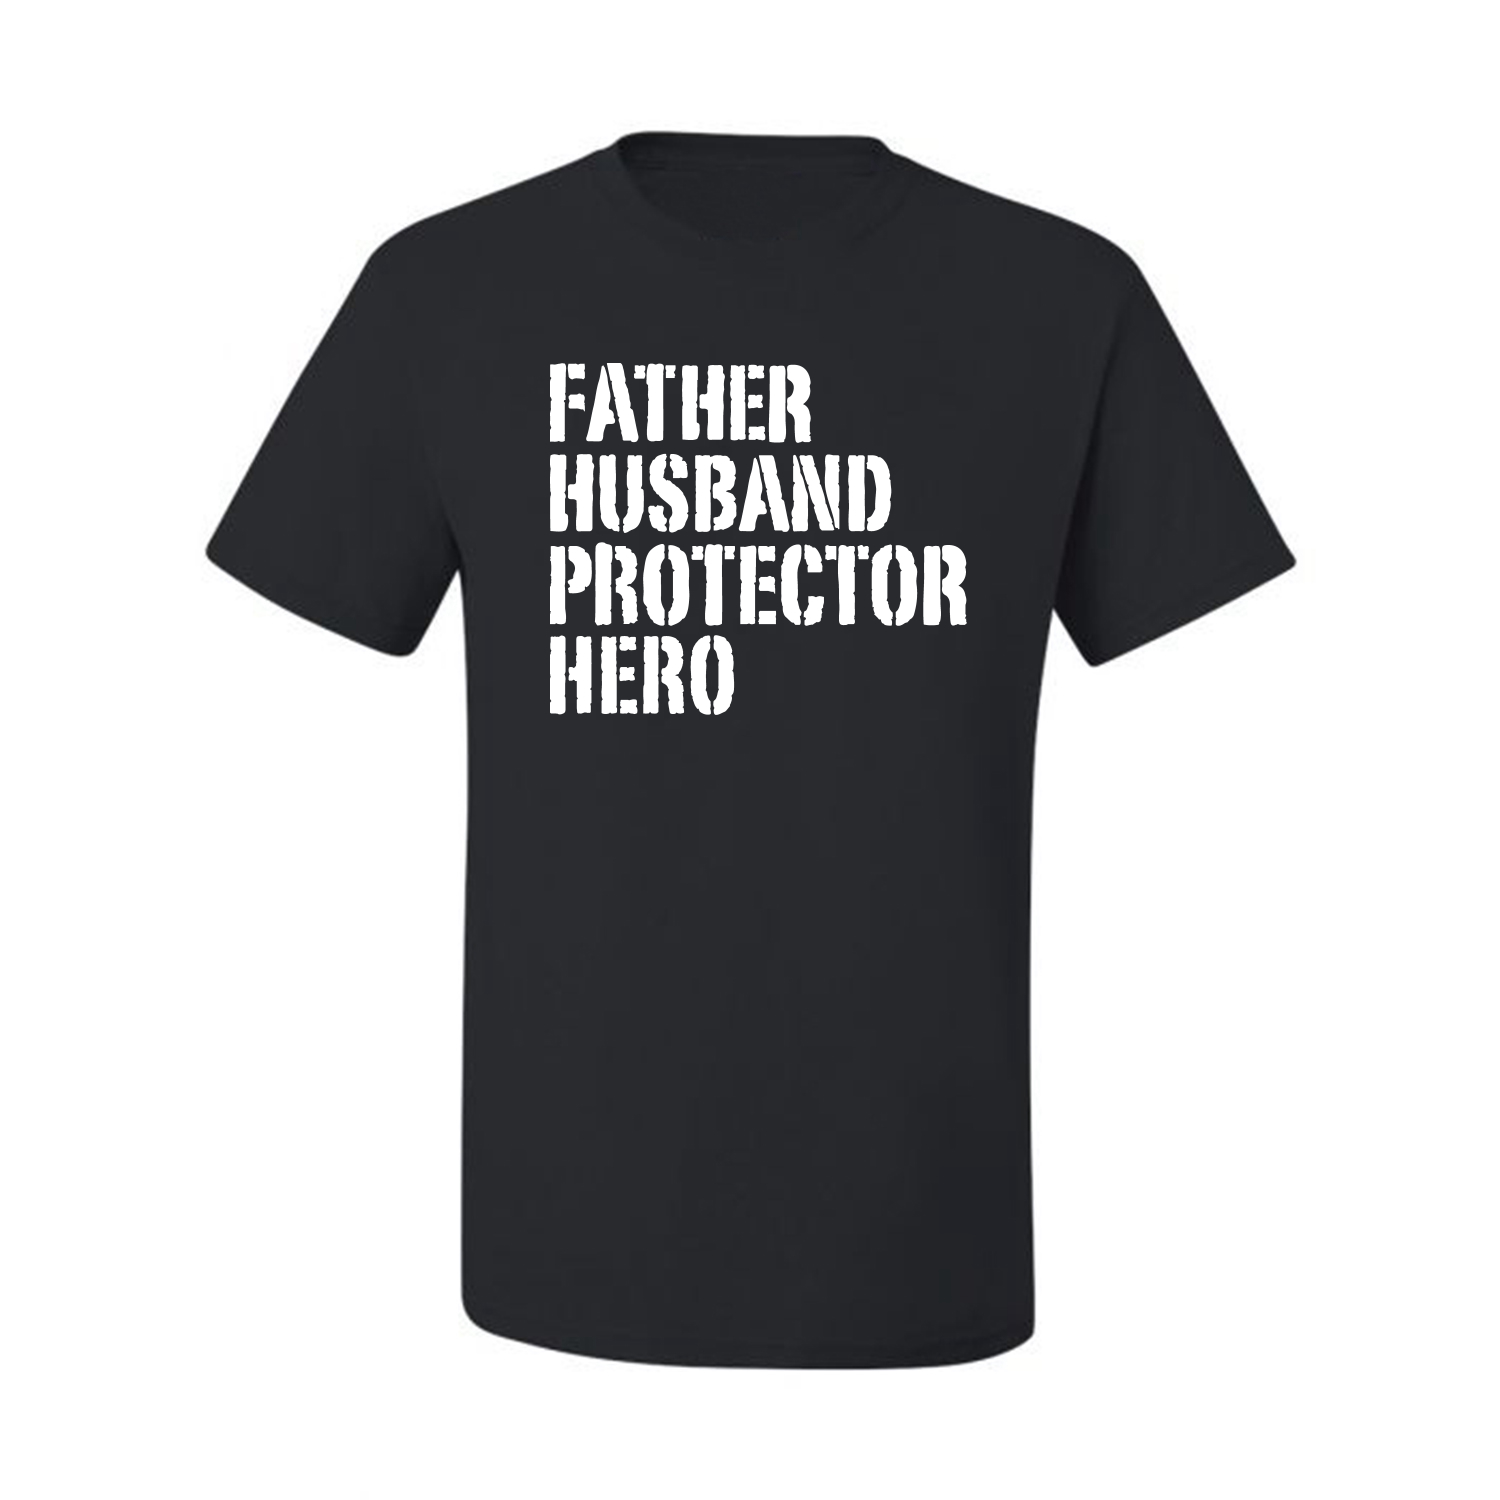 Wild Bobby,Father Husband Protector Hero Best Dad Husband Gift, Father's Day, Men Graphic Tees, Black, 2XL - image 2 of 3